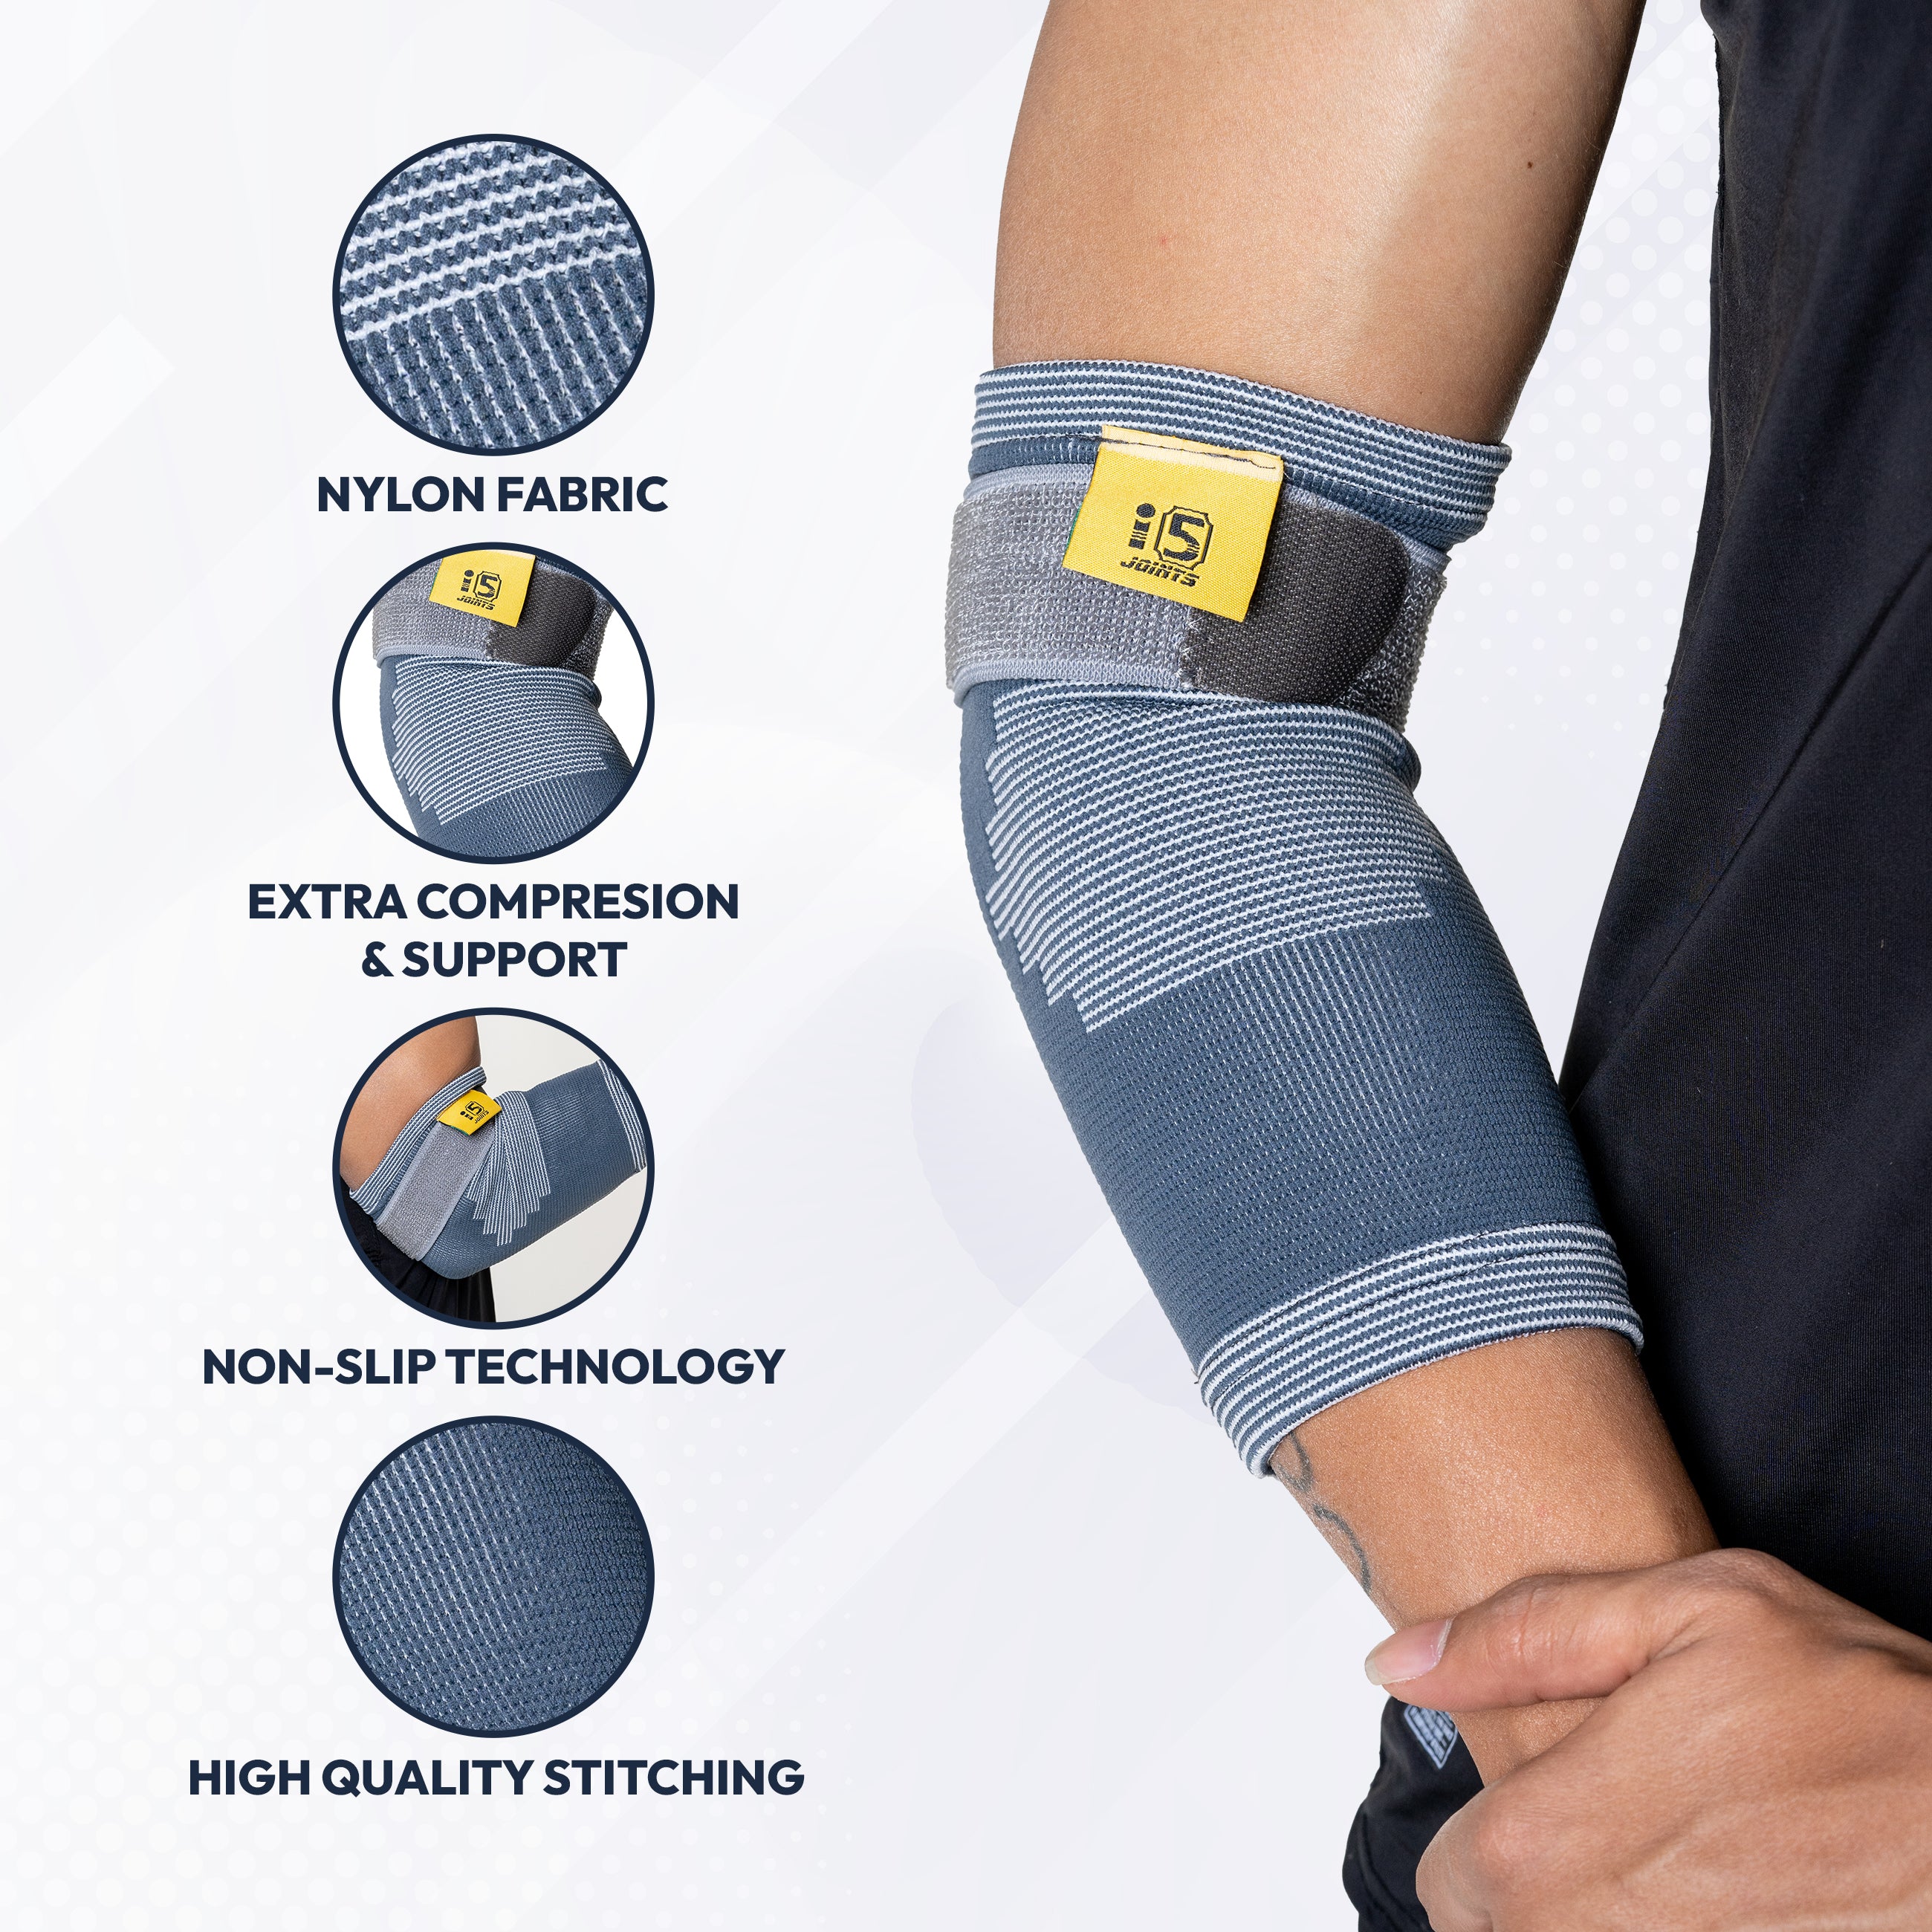 I5Joints Elbow Support Belt(I5 Joints elbow support, elbow pain ,elbow Sleeves Arm Brace for Sports, Gym, Joint Pain, Tendonitis and Weightlifting Sleeves Band for Pain Relief Large Beige Elbow Support for Men & Women)